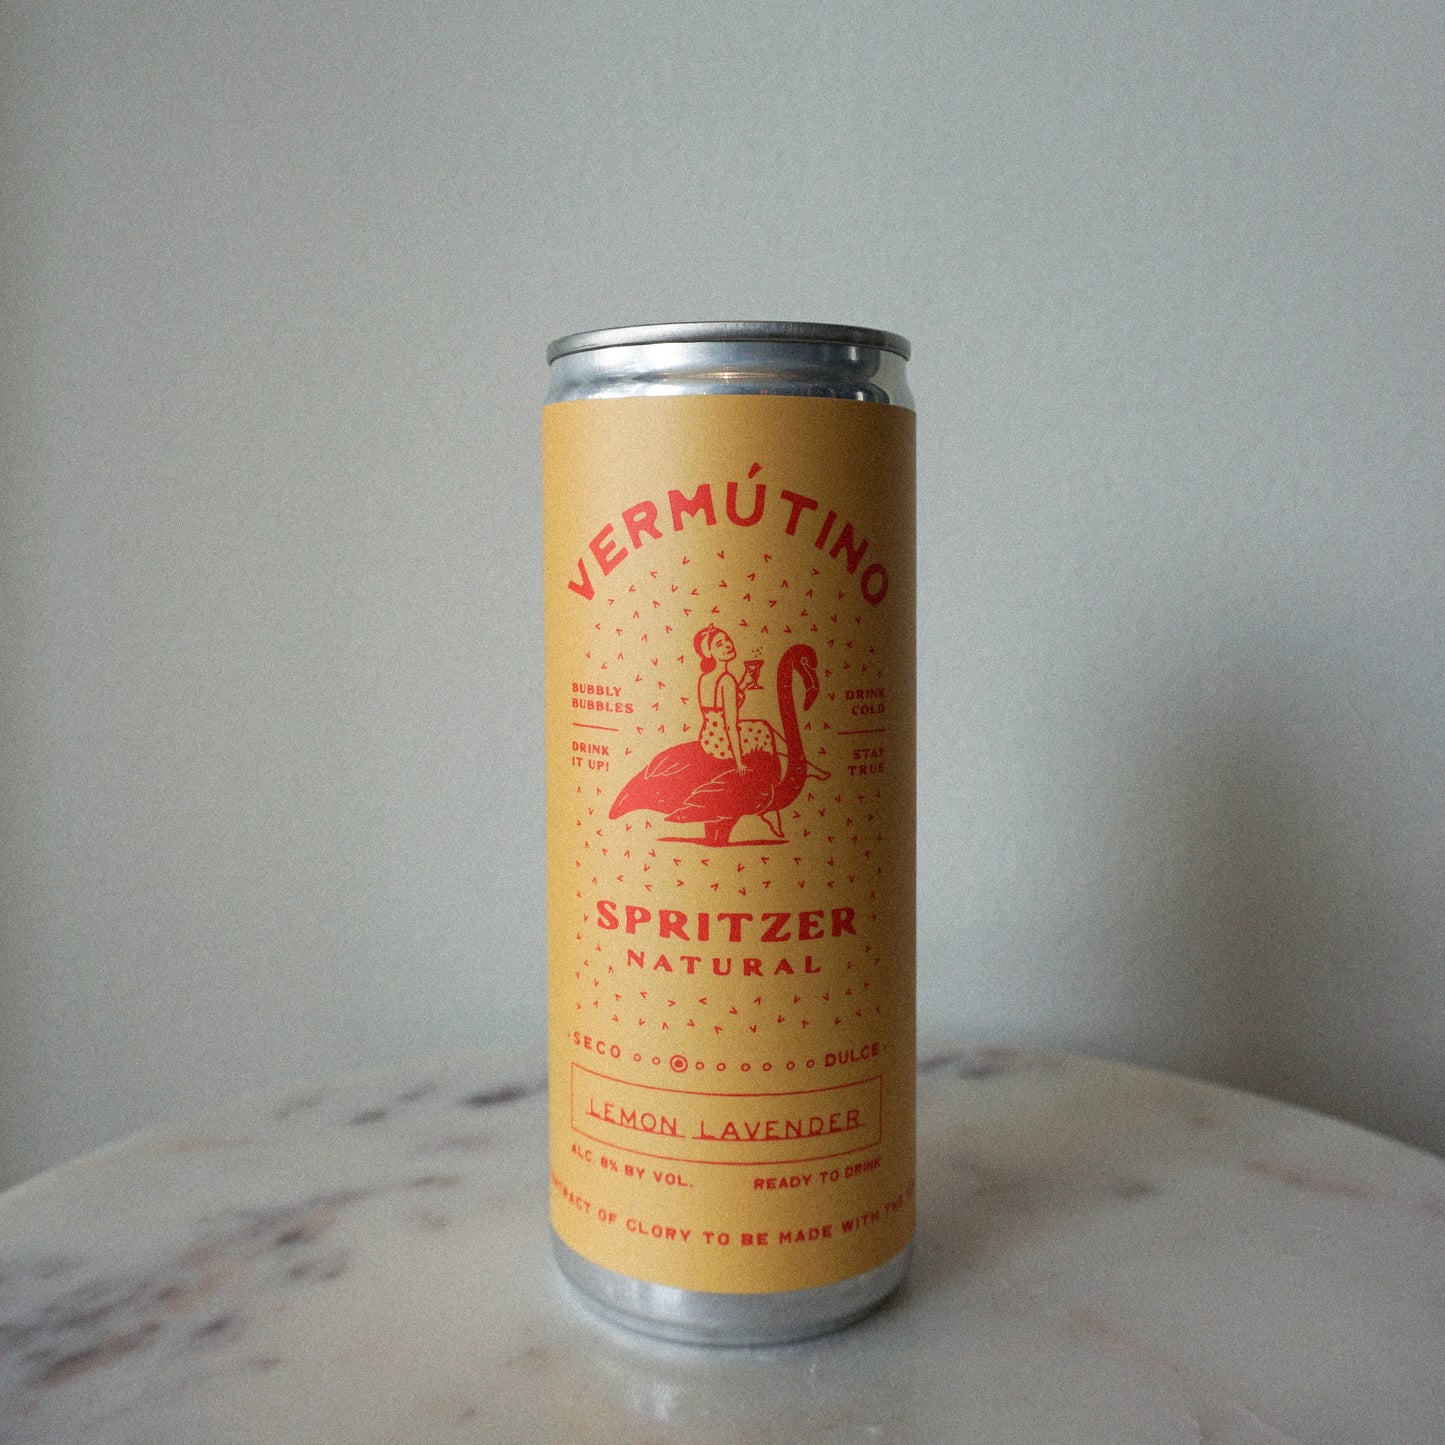 The wine collective vermutino lemon lavender cans